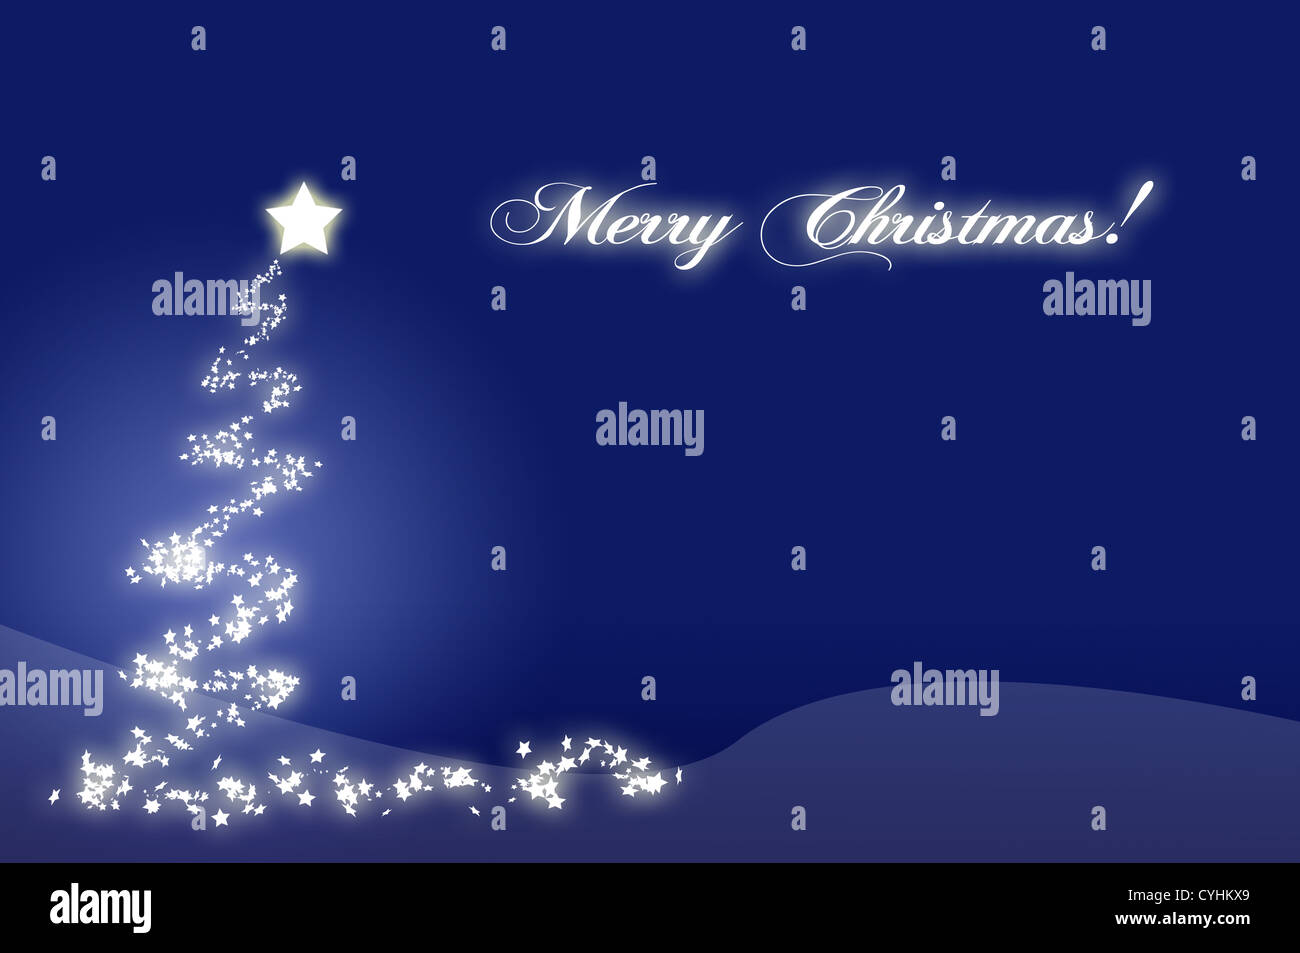 Blue christmas tree wallpaper, computer generated. Stock Photo